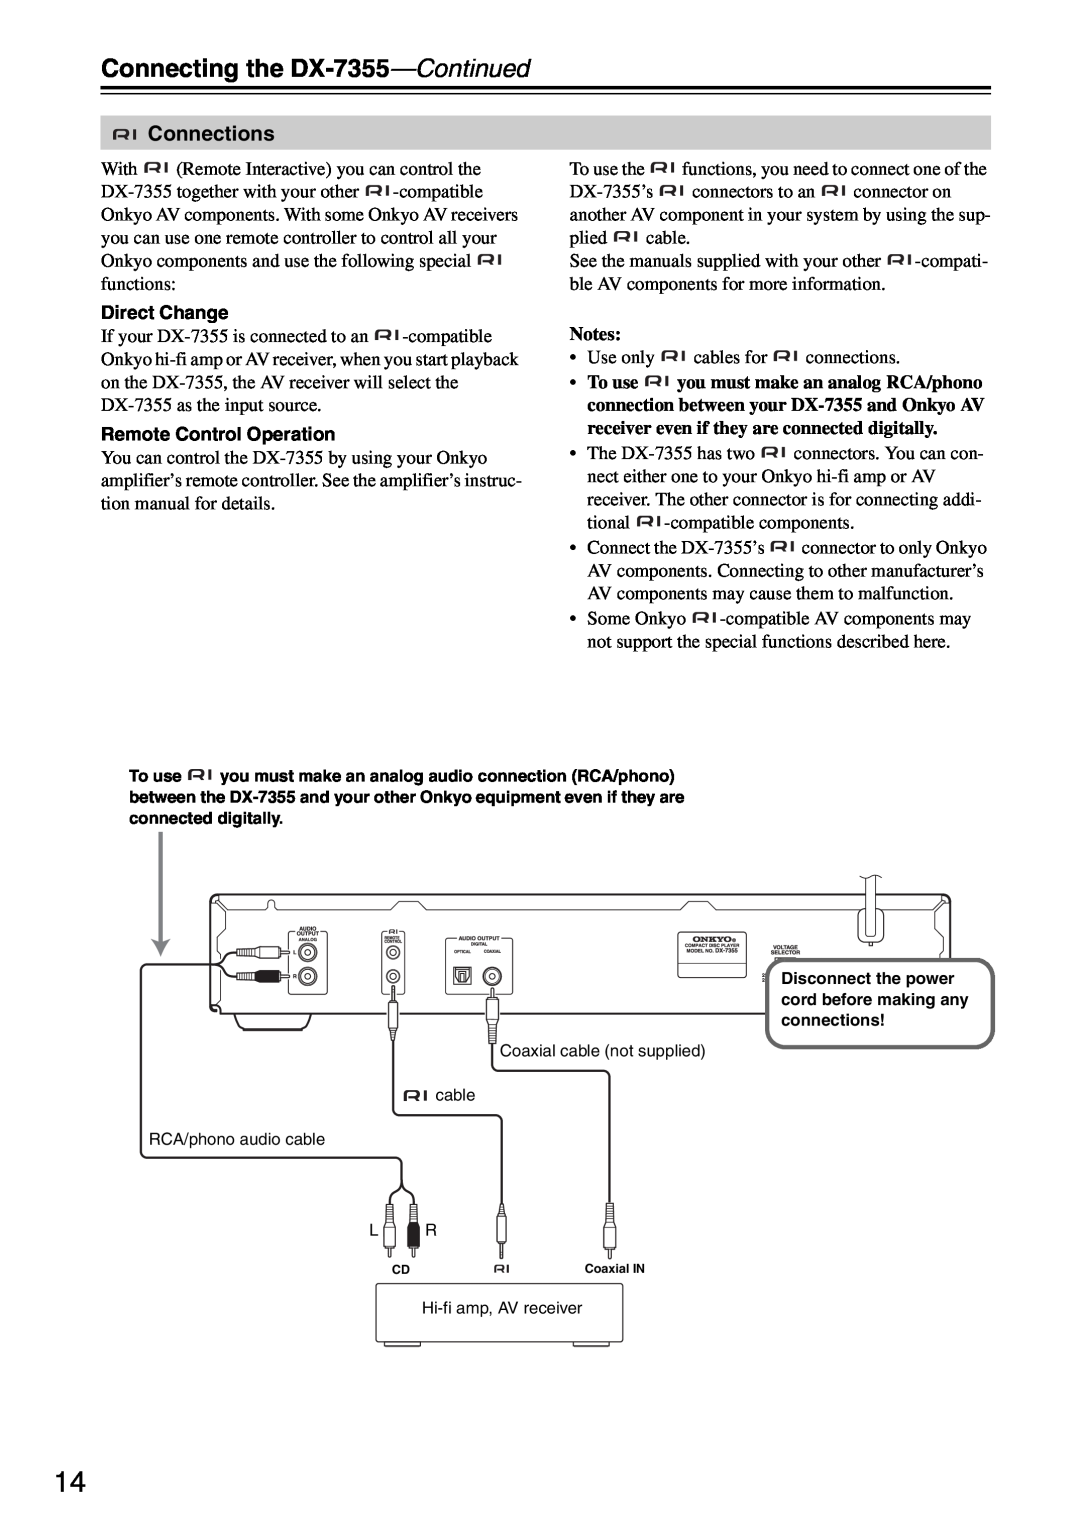 Onkyo instruction manual Connecting the DX-7355-Continued, Connections 